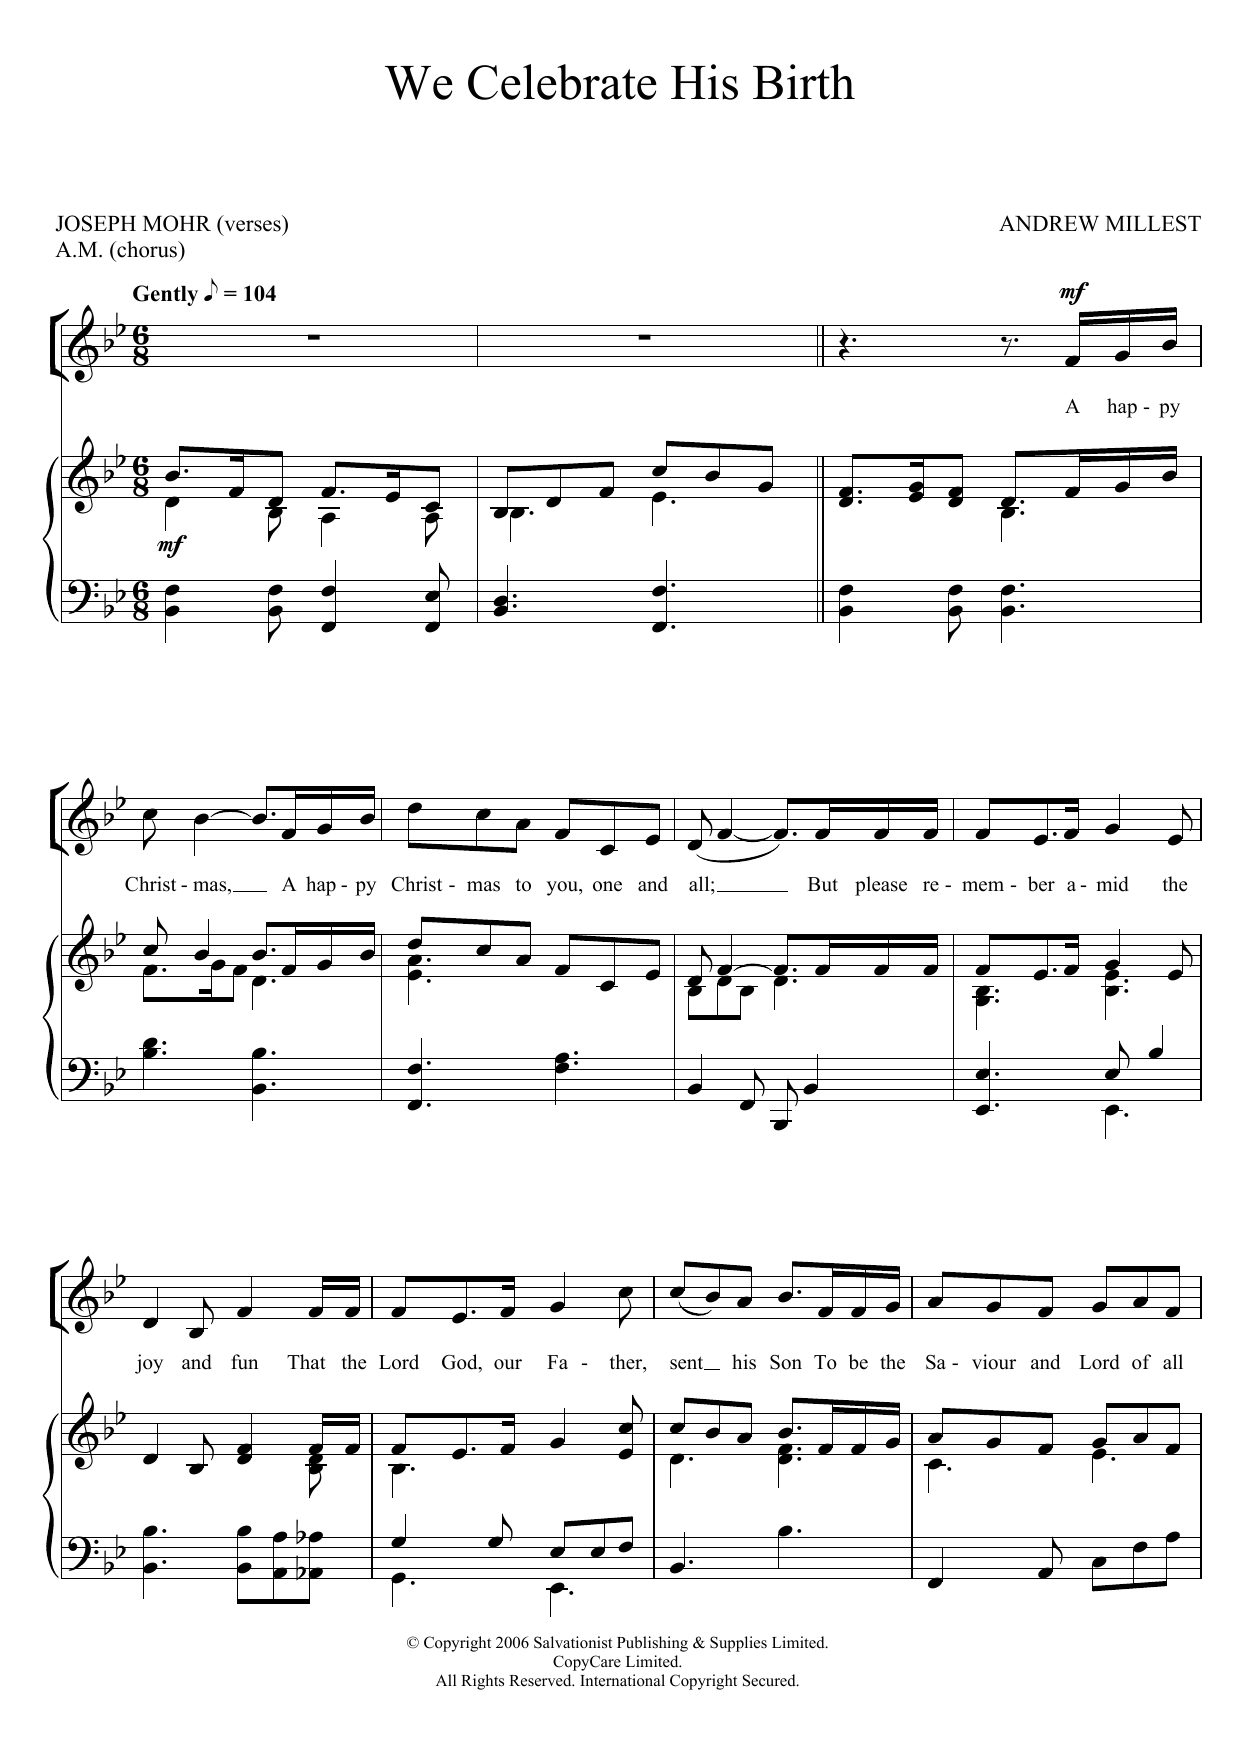 Download The Salvation Army We Celebrate His Birth Sheet Music